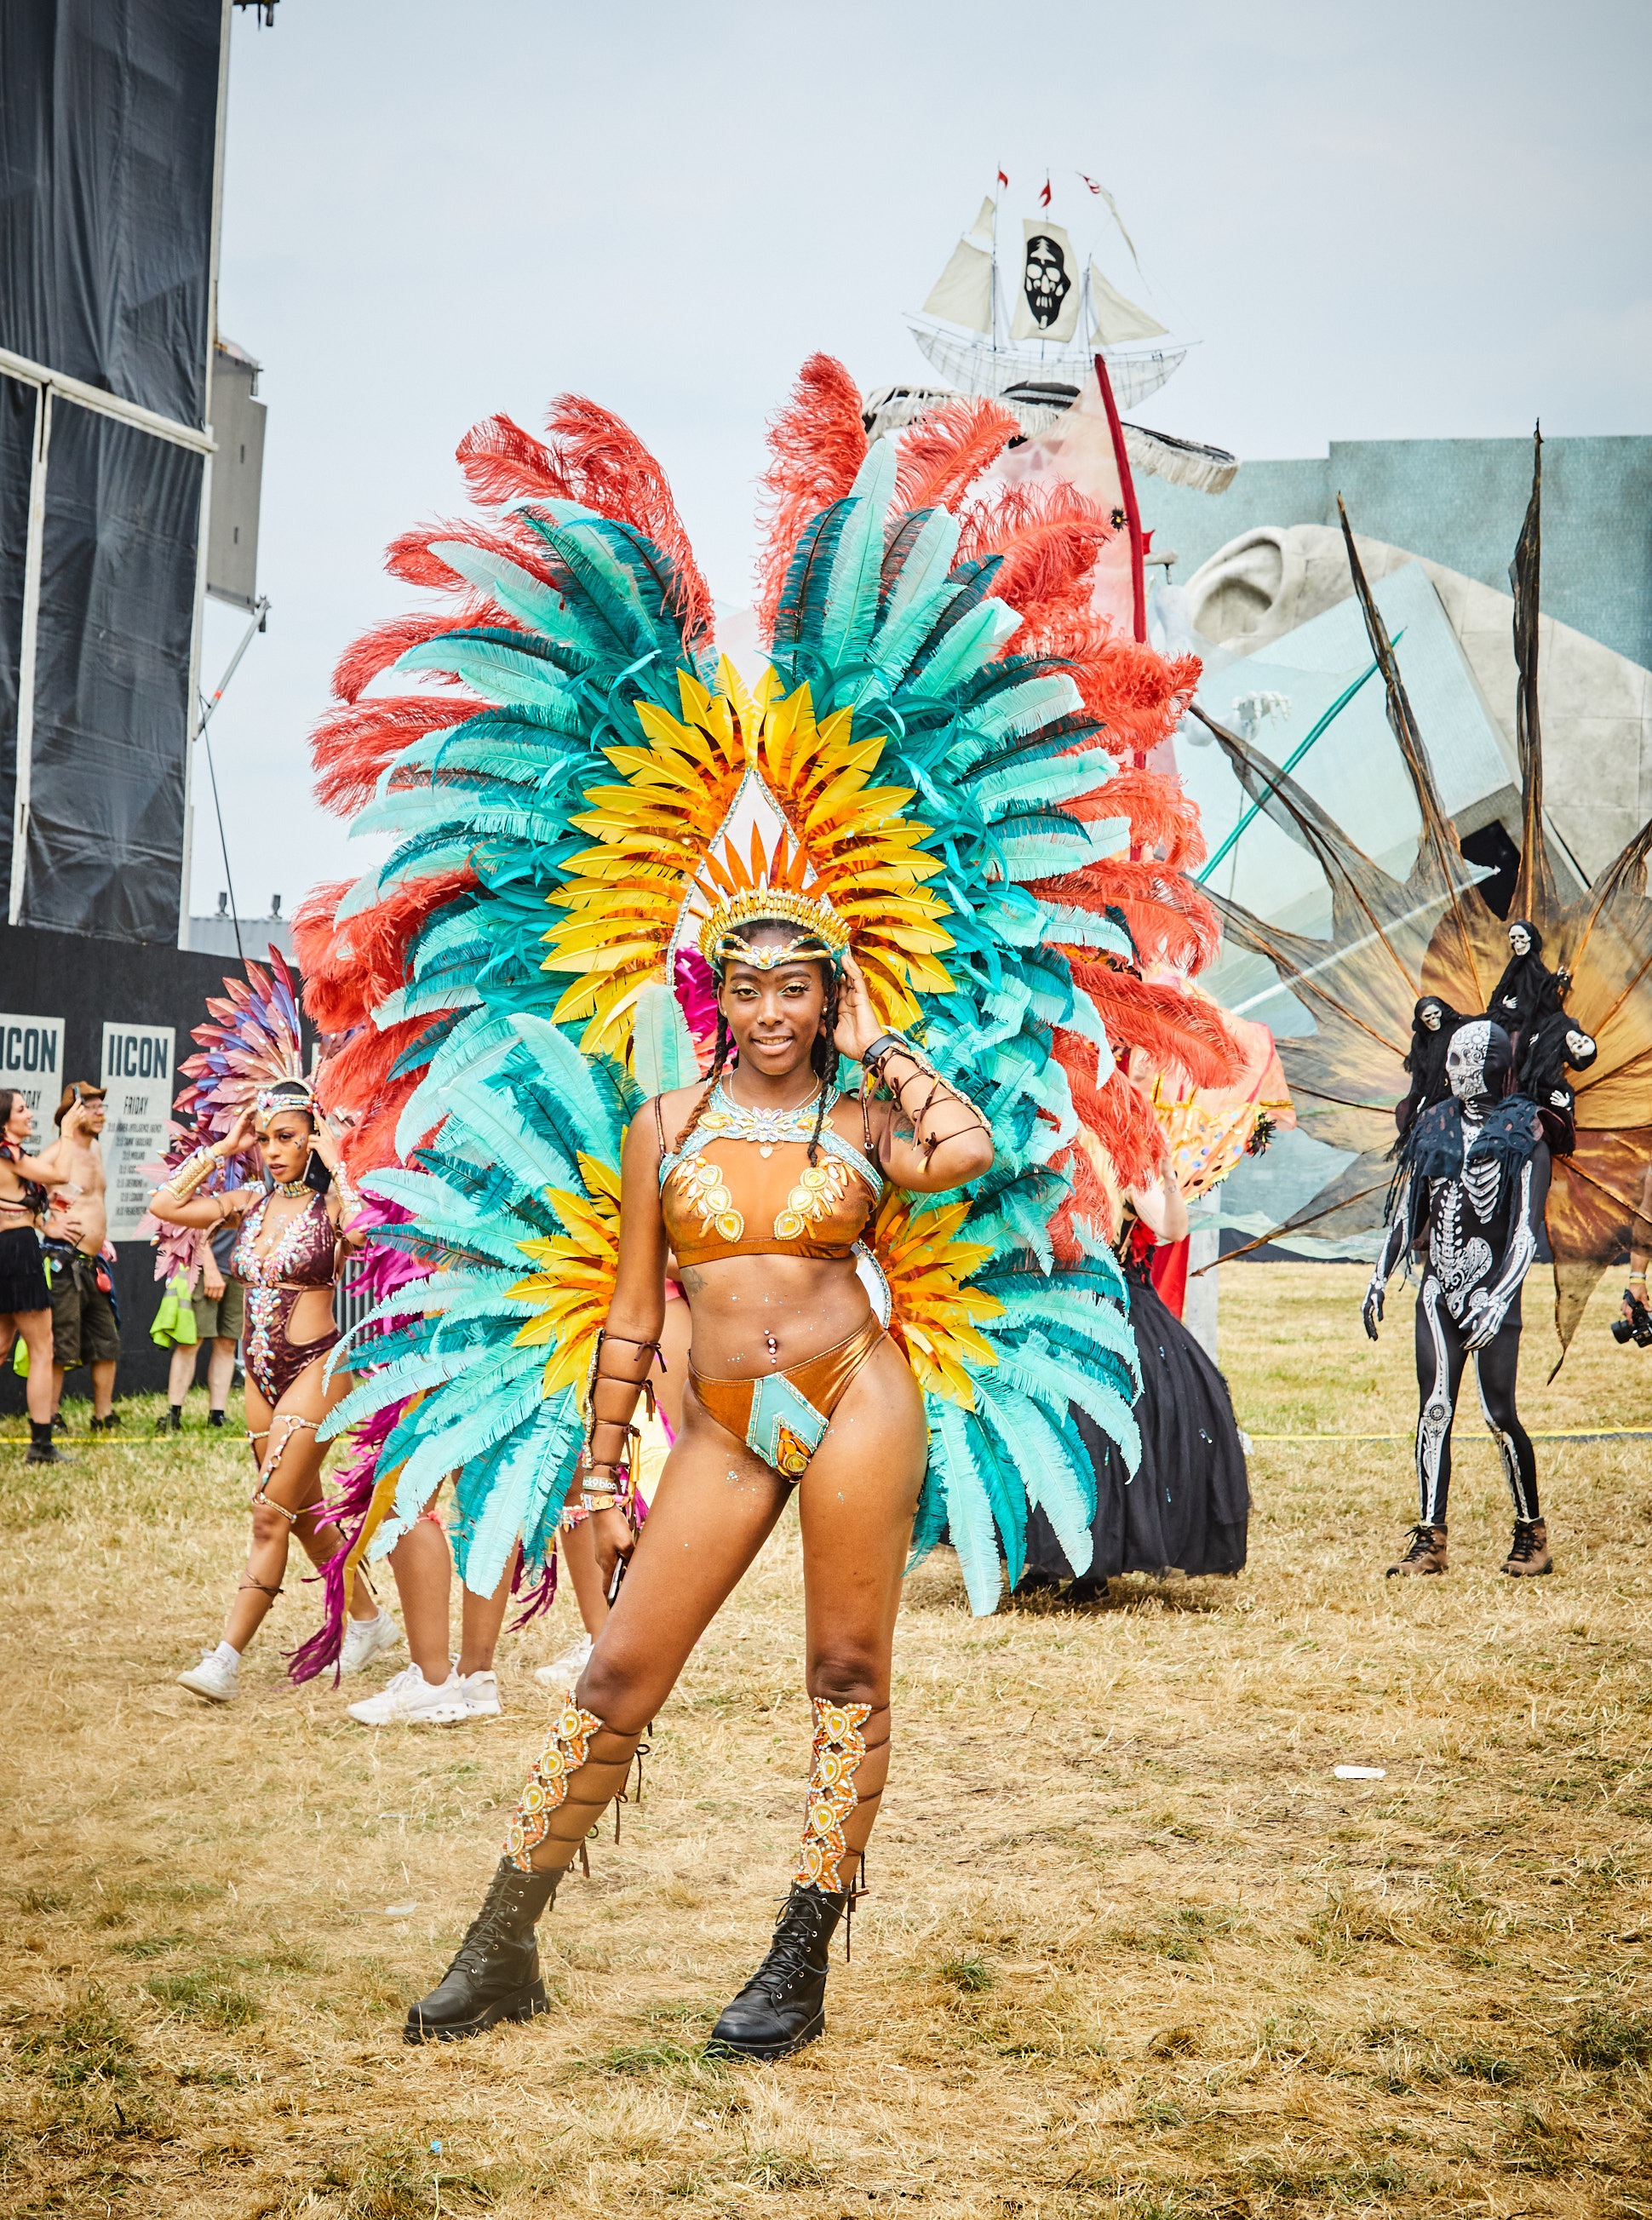 Creating something special: How Notting Hill Carnival brought its joyful  spirit to Glastonbury's Block9 - Features - Mixmag